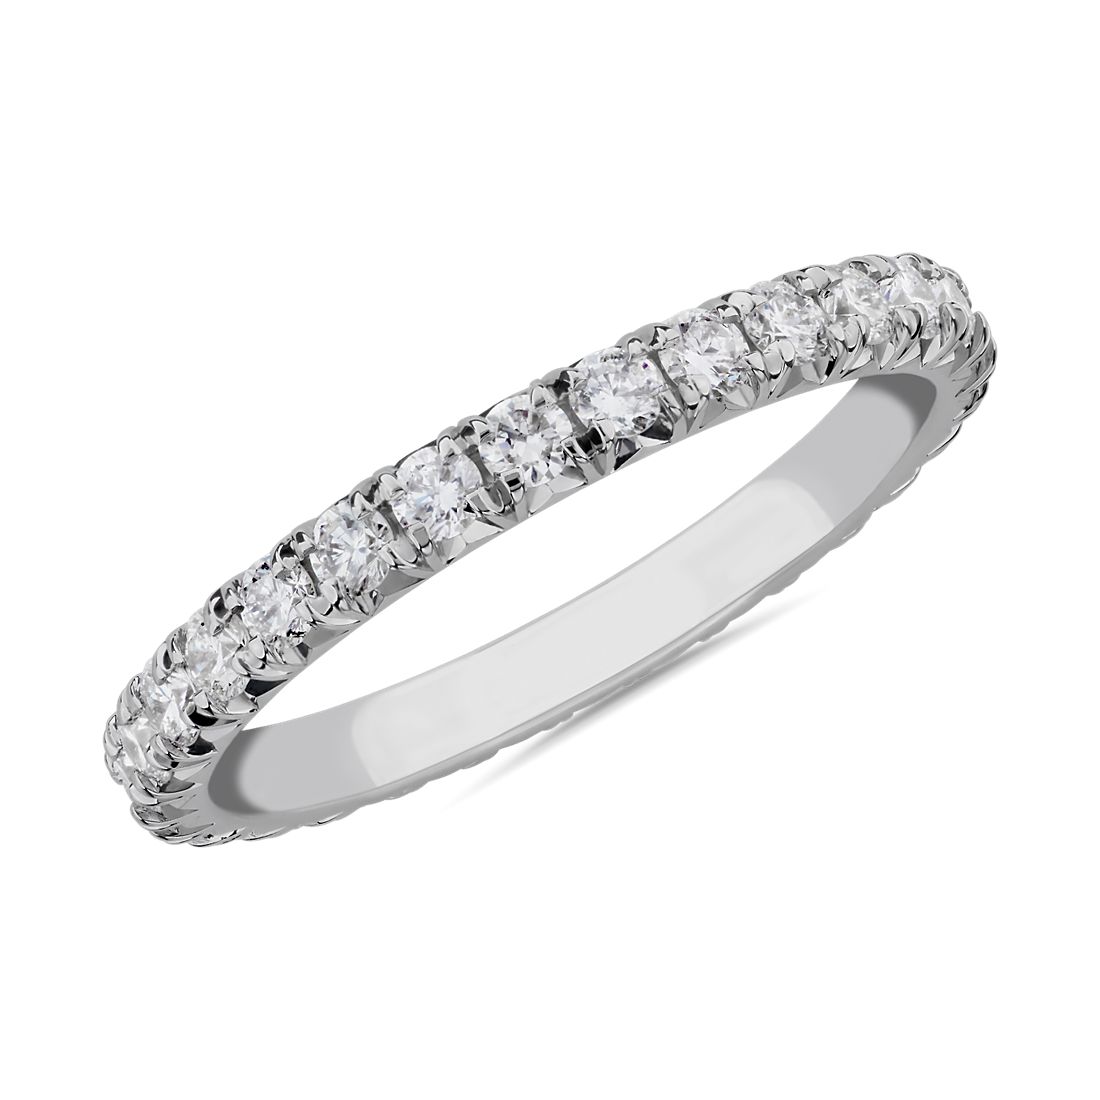 French Pave Diamond Eternity Band in 14k White Gold (0.62 ct. tw.)